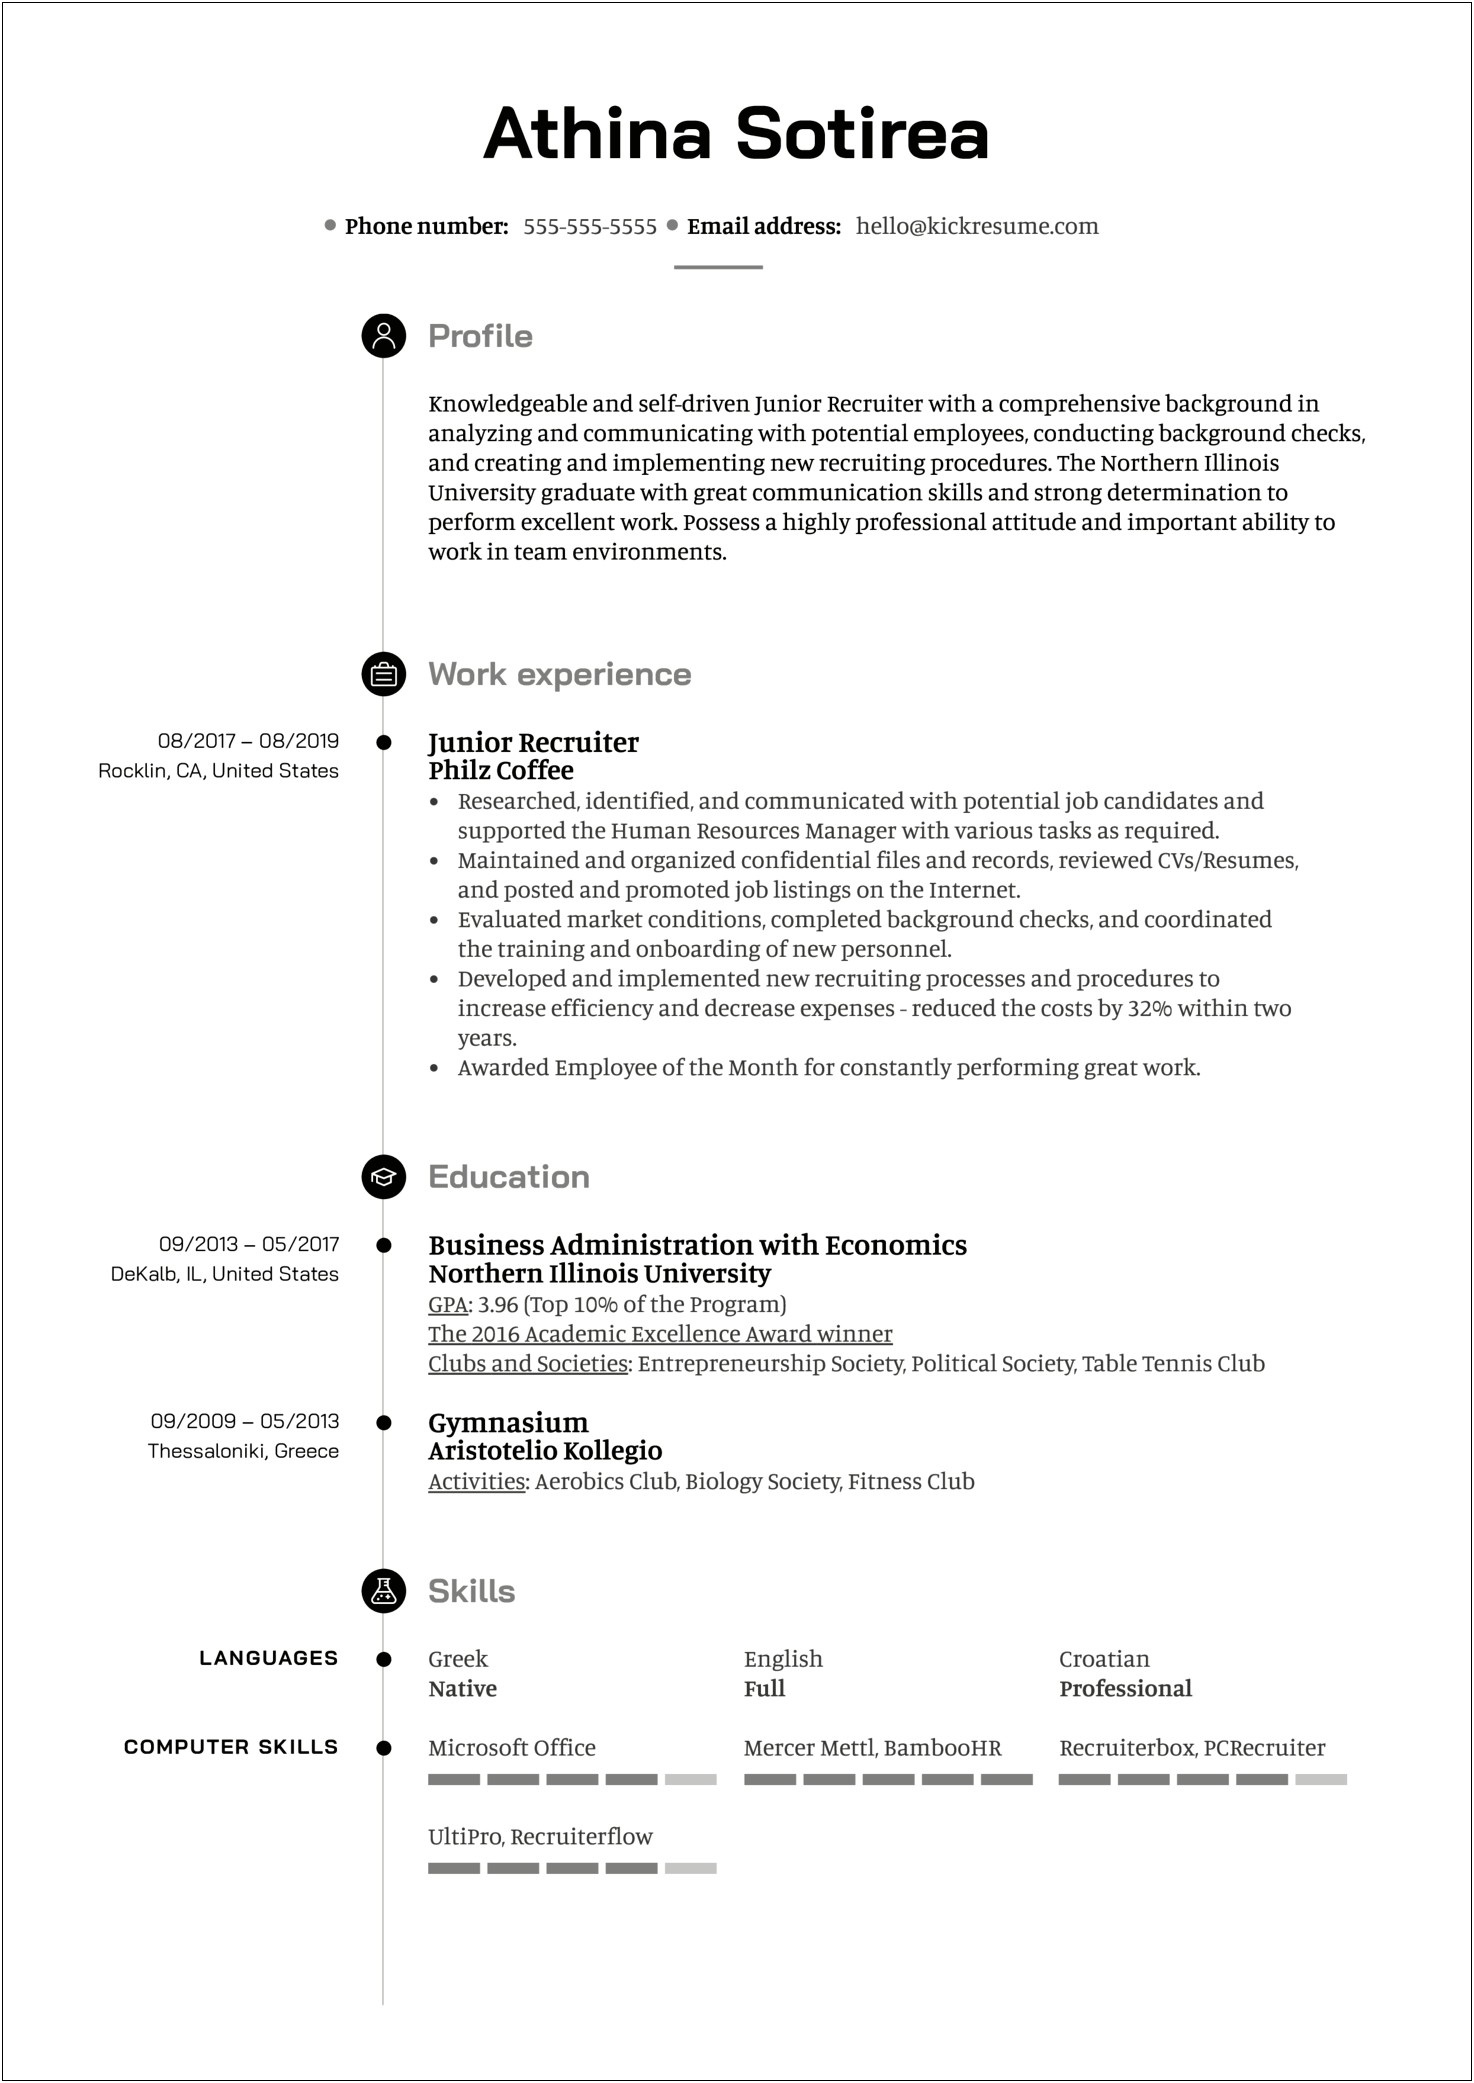 Resume To A Recruiting Company Sample